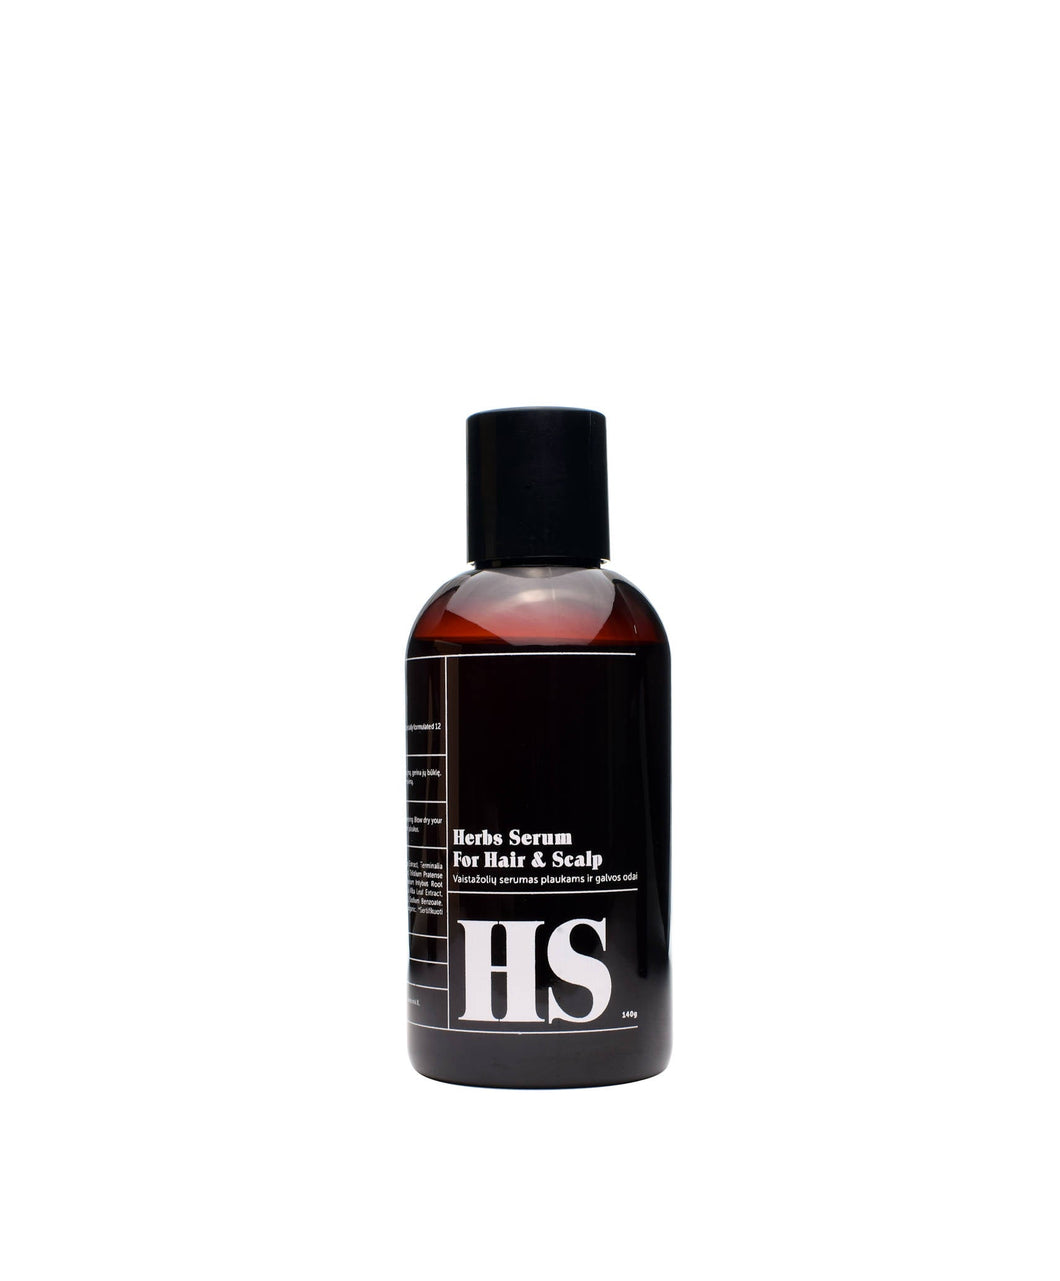 Herbs serum for hair and scalp 150g